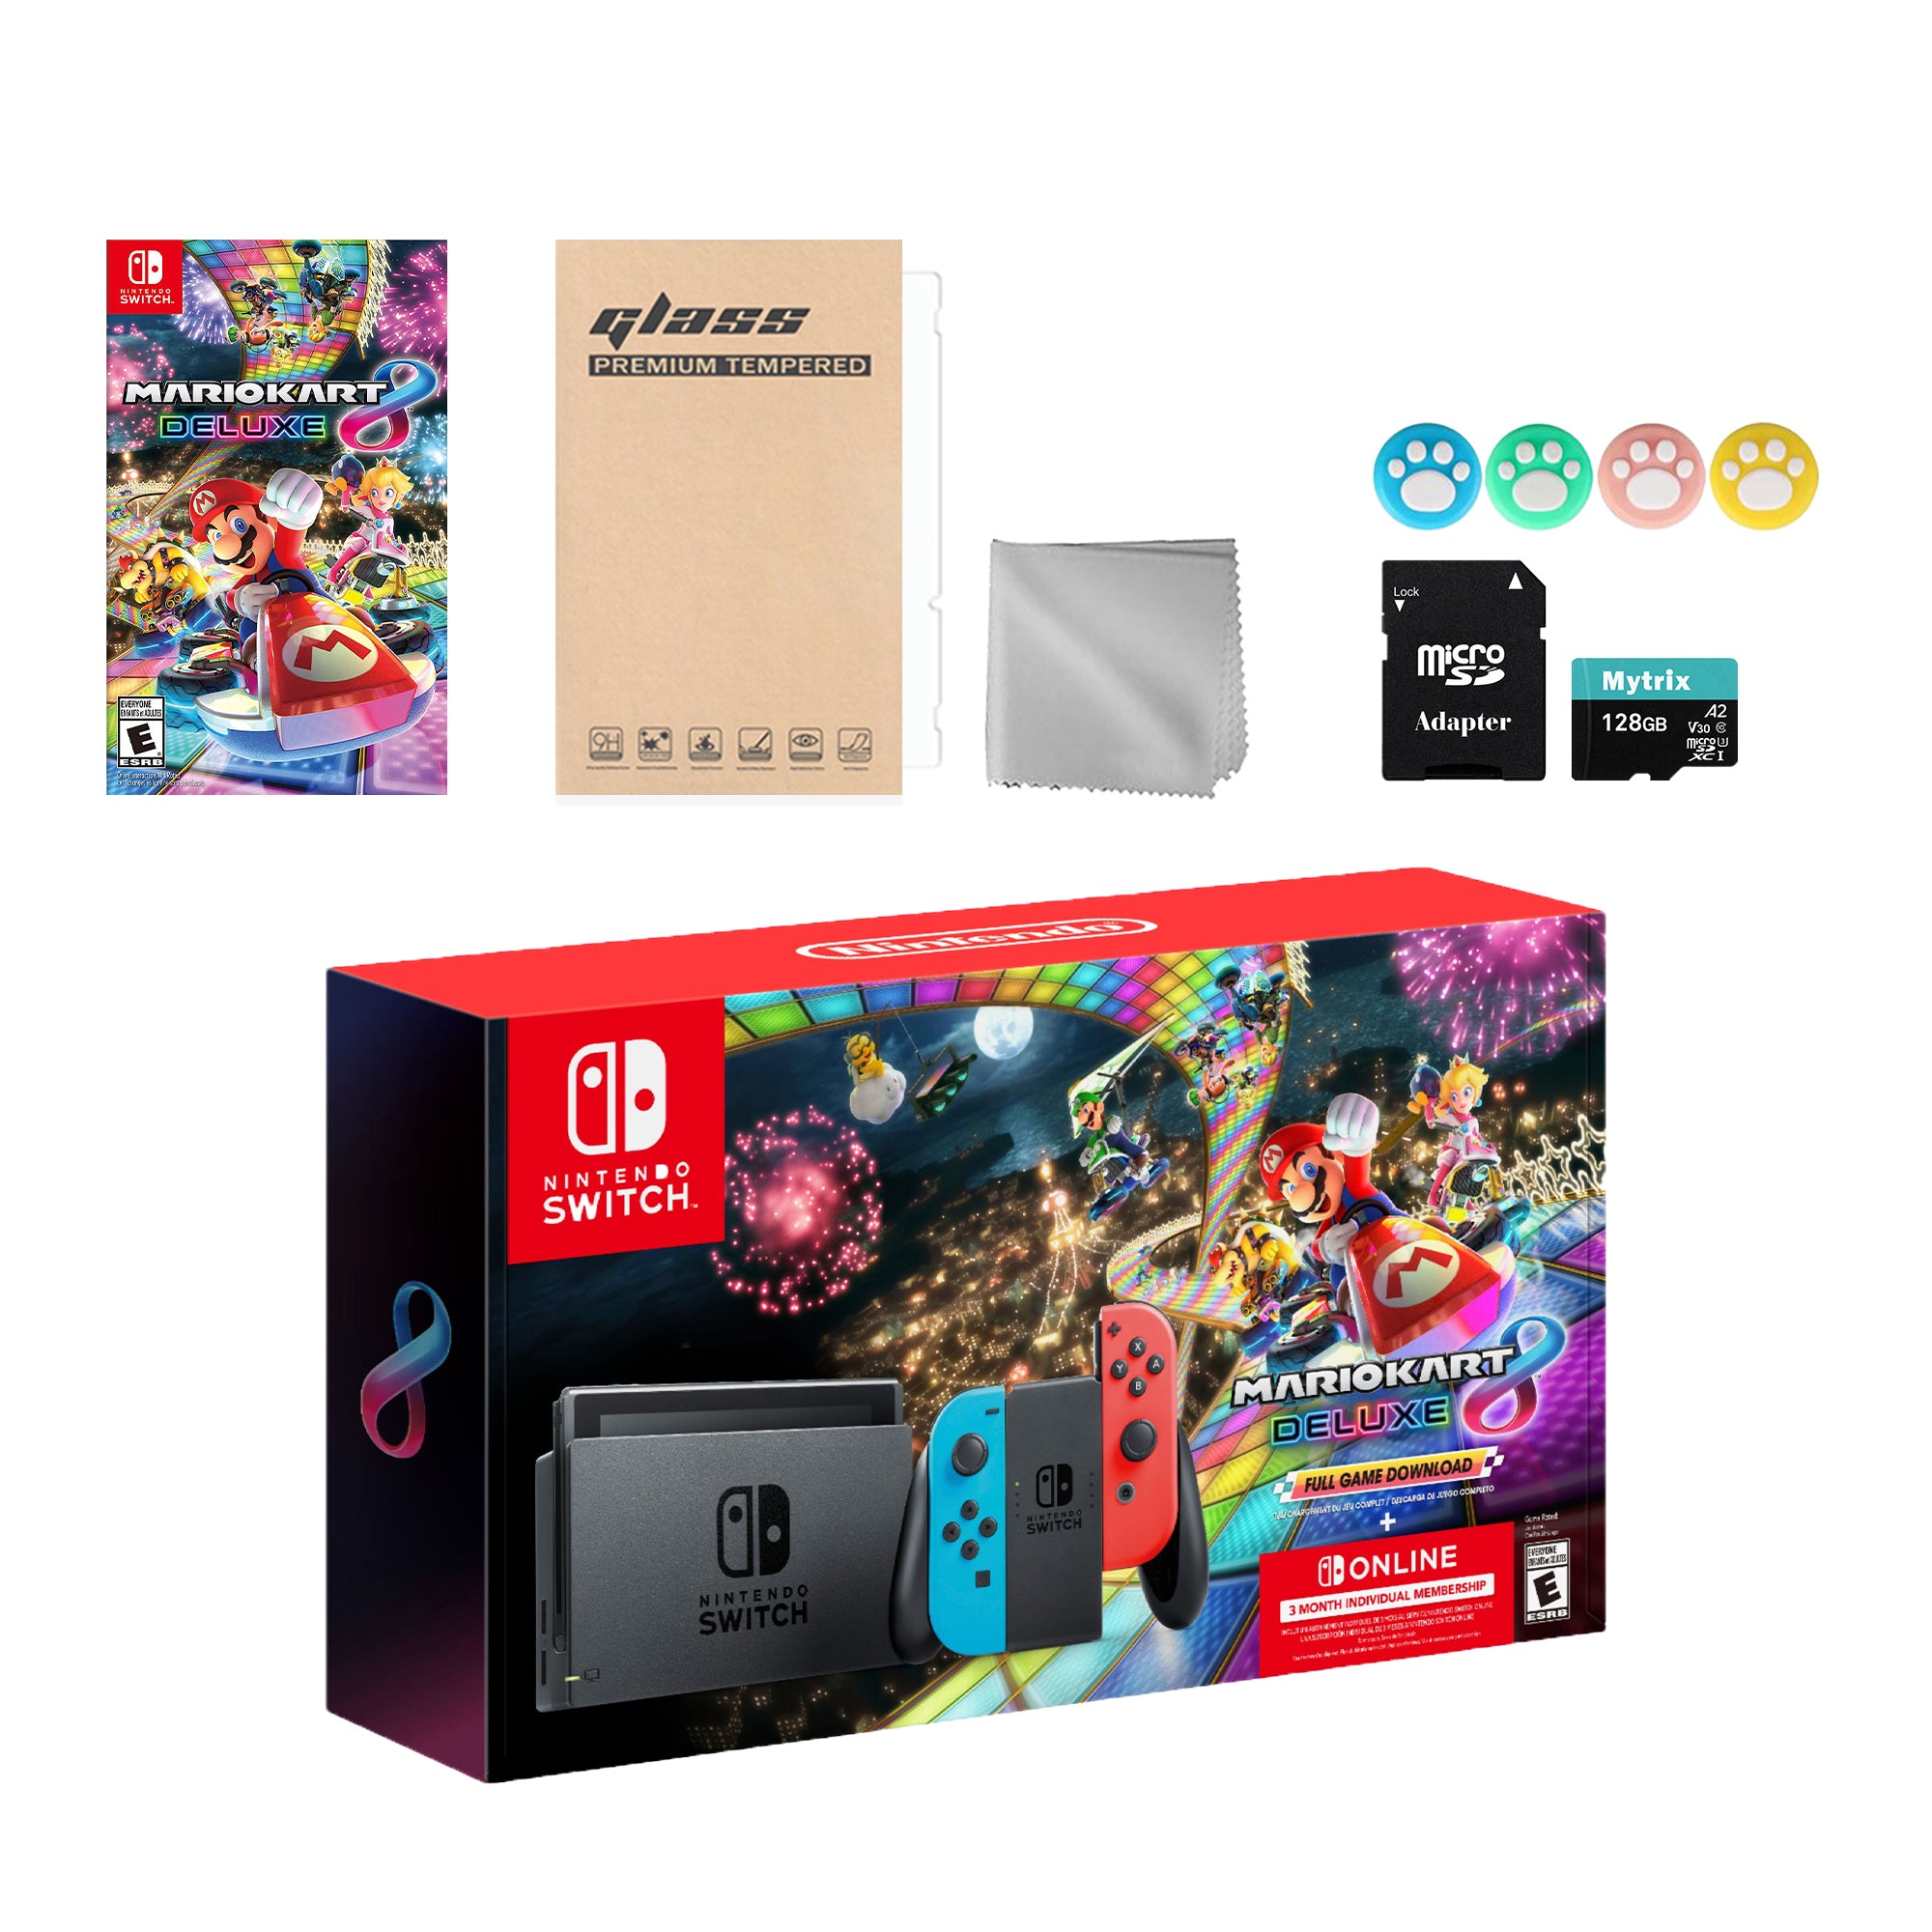 Nintendo Switch Mario Kart 8 Deluxe Bundle: Red Blue Console, Mario Kart 8 & Membership, Mytrix 128GB MicroSD Card and Accessories